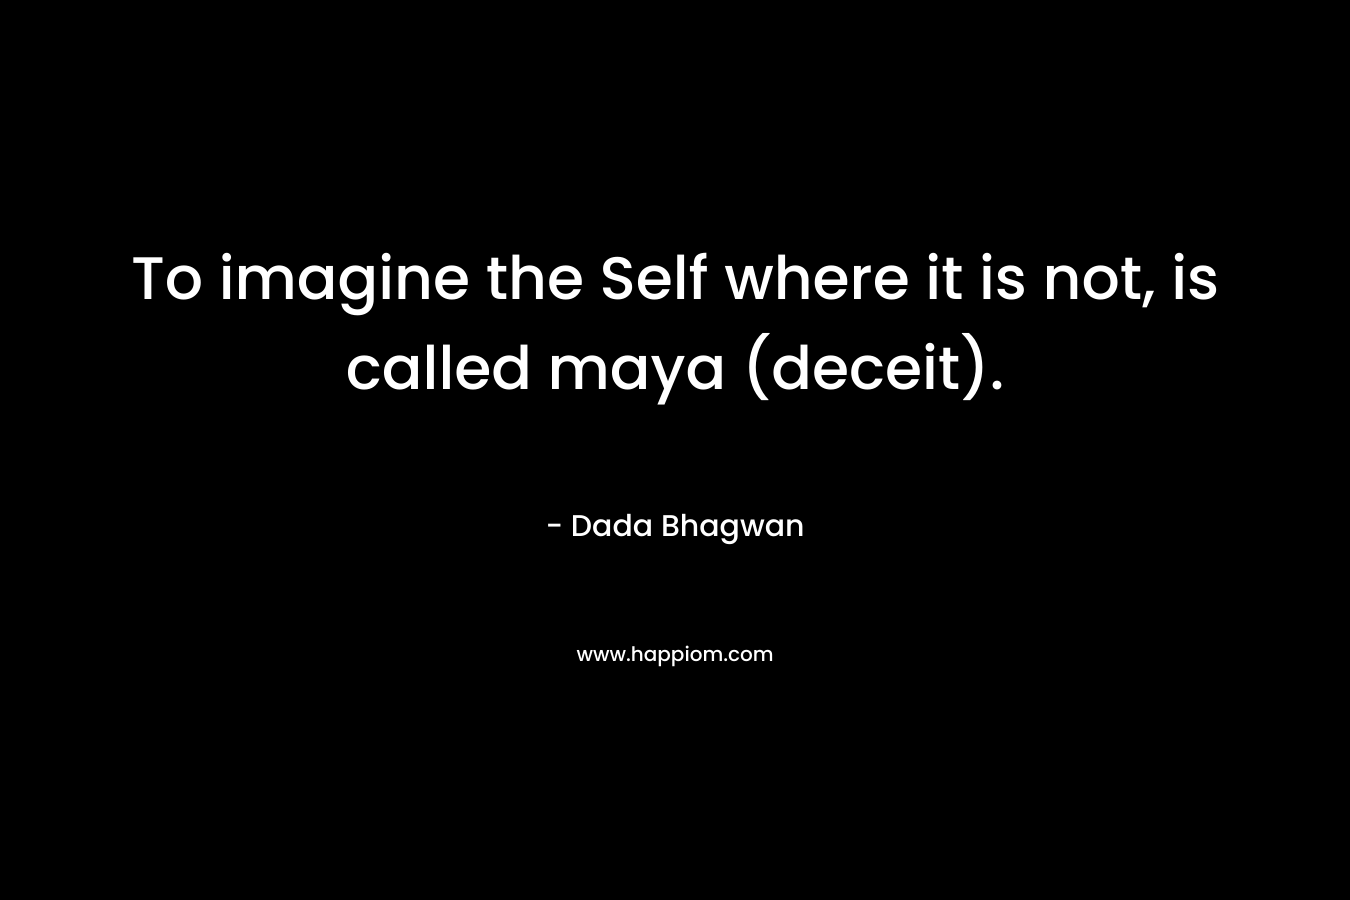 To imagine the Self where it is not, is called maya (deceit).